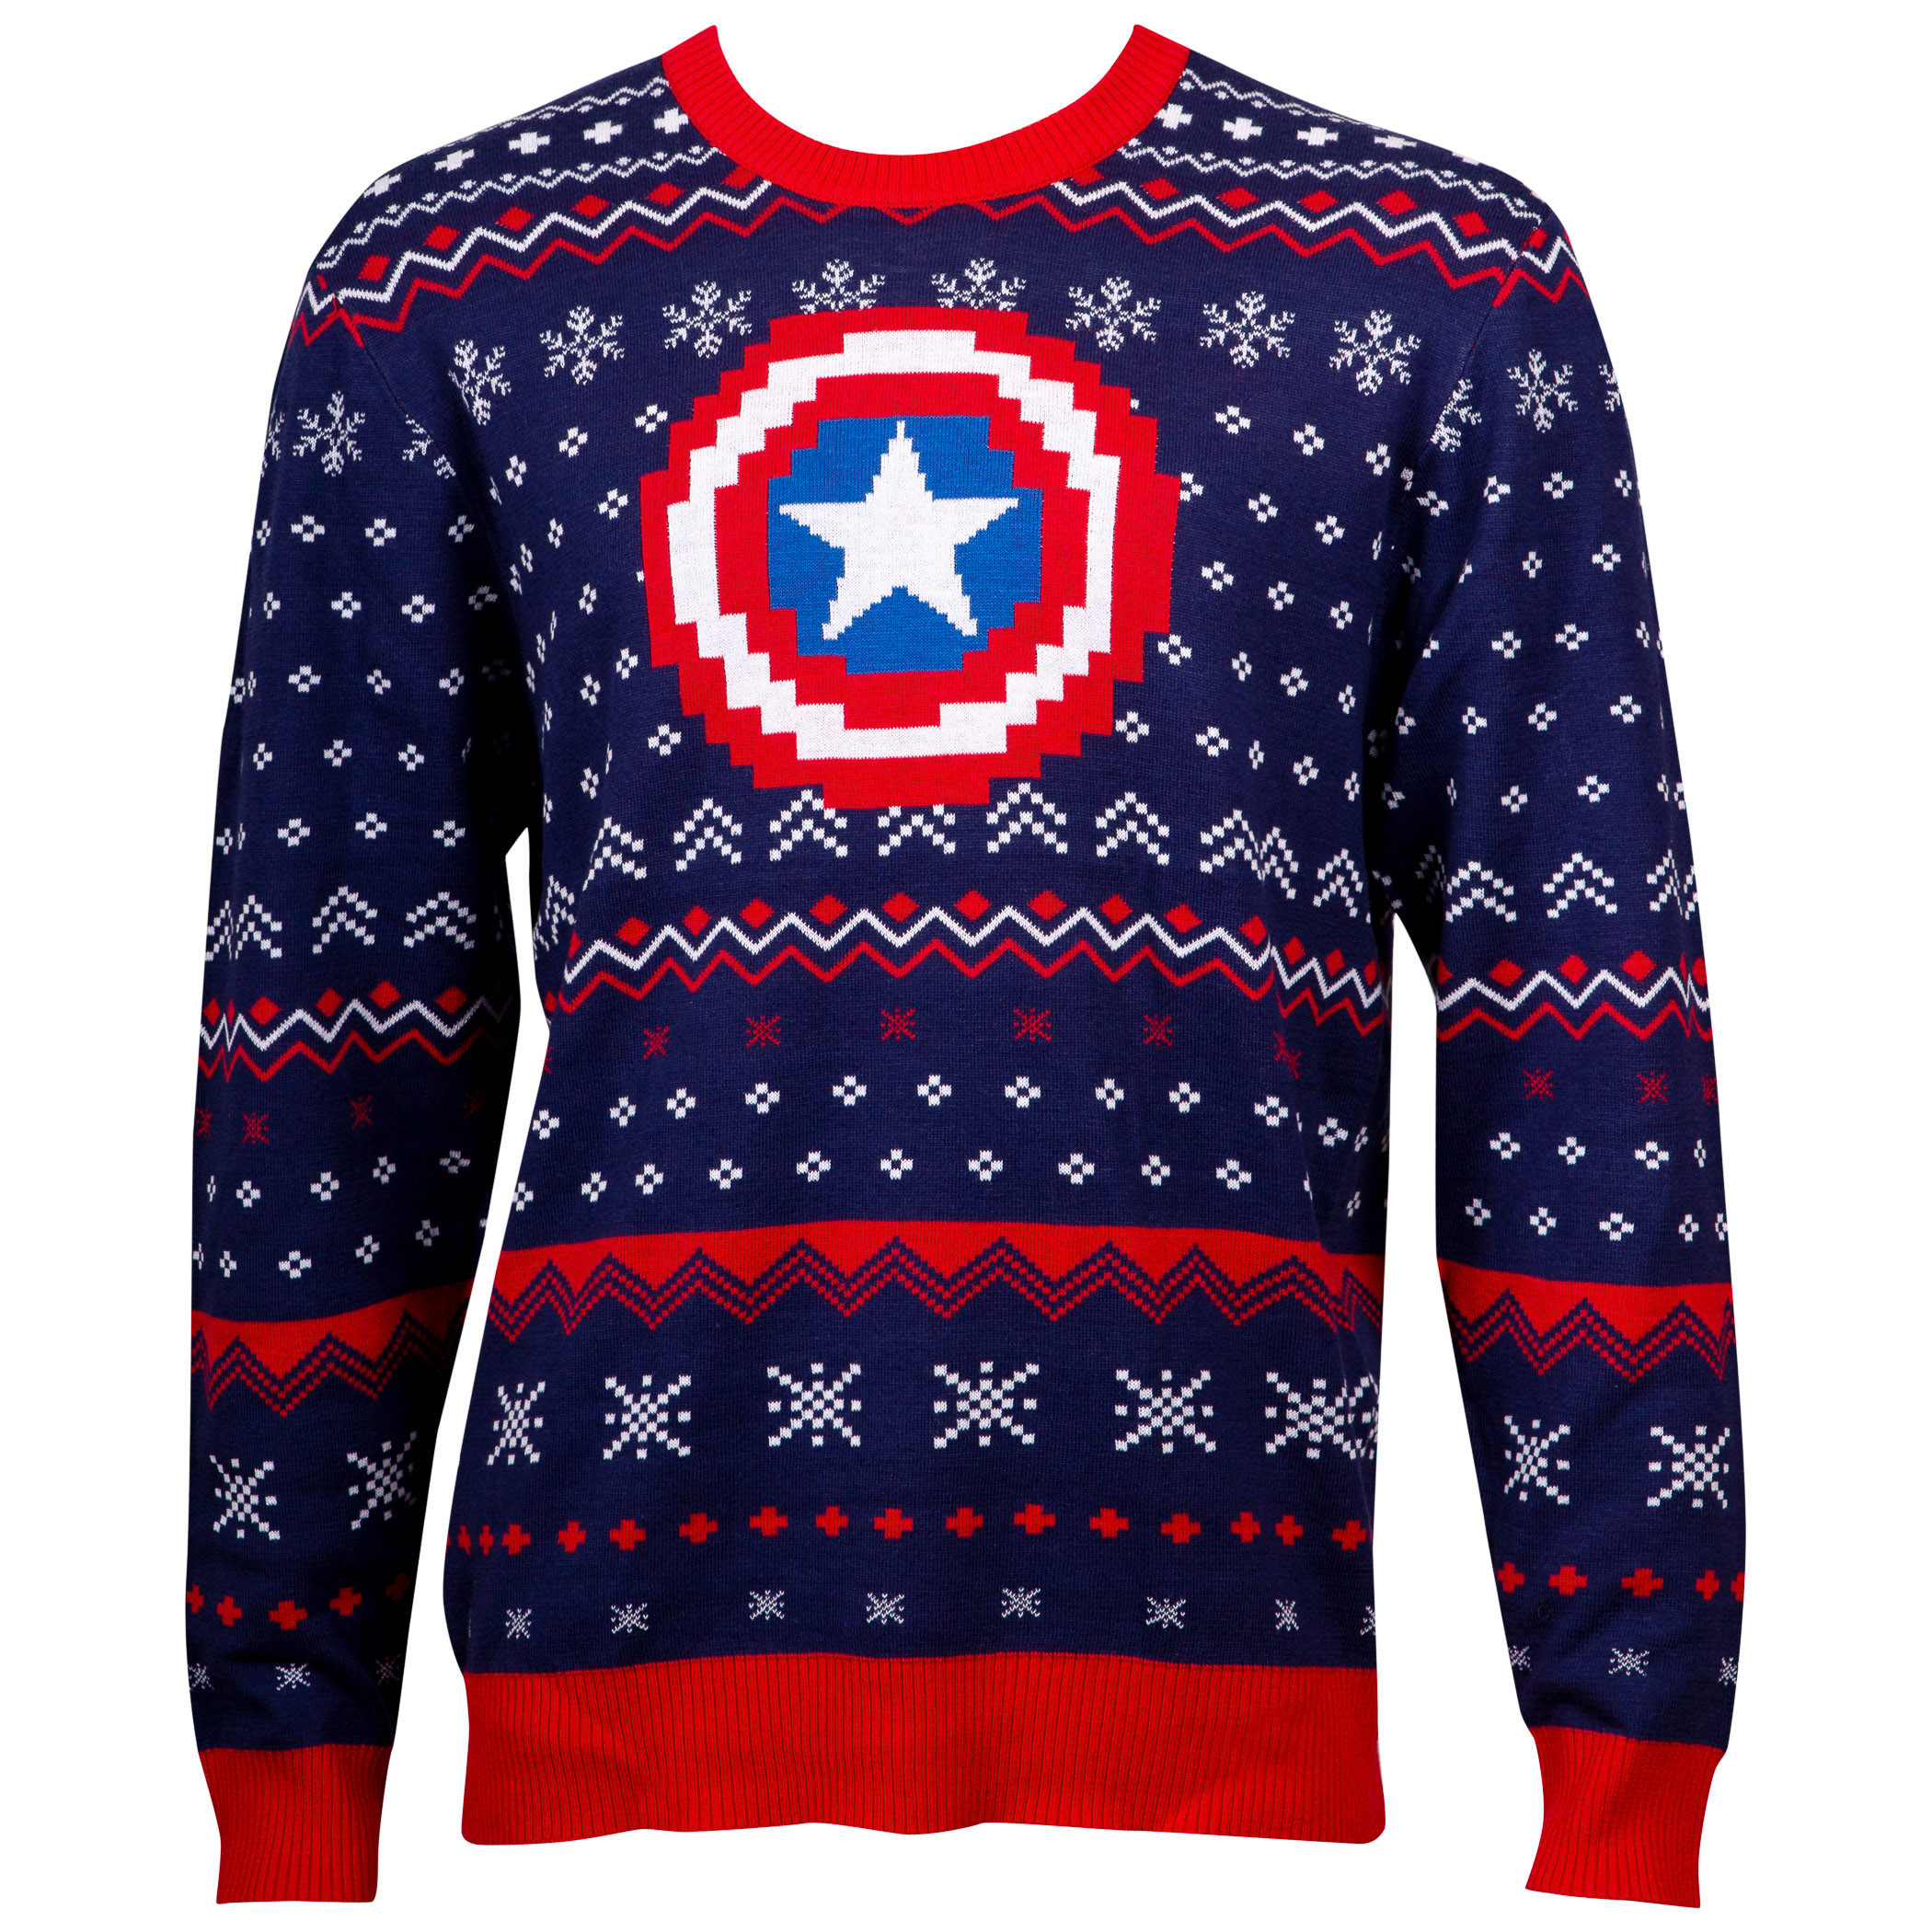 Captain America Patterned Ugly Holiday Sweater